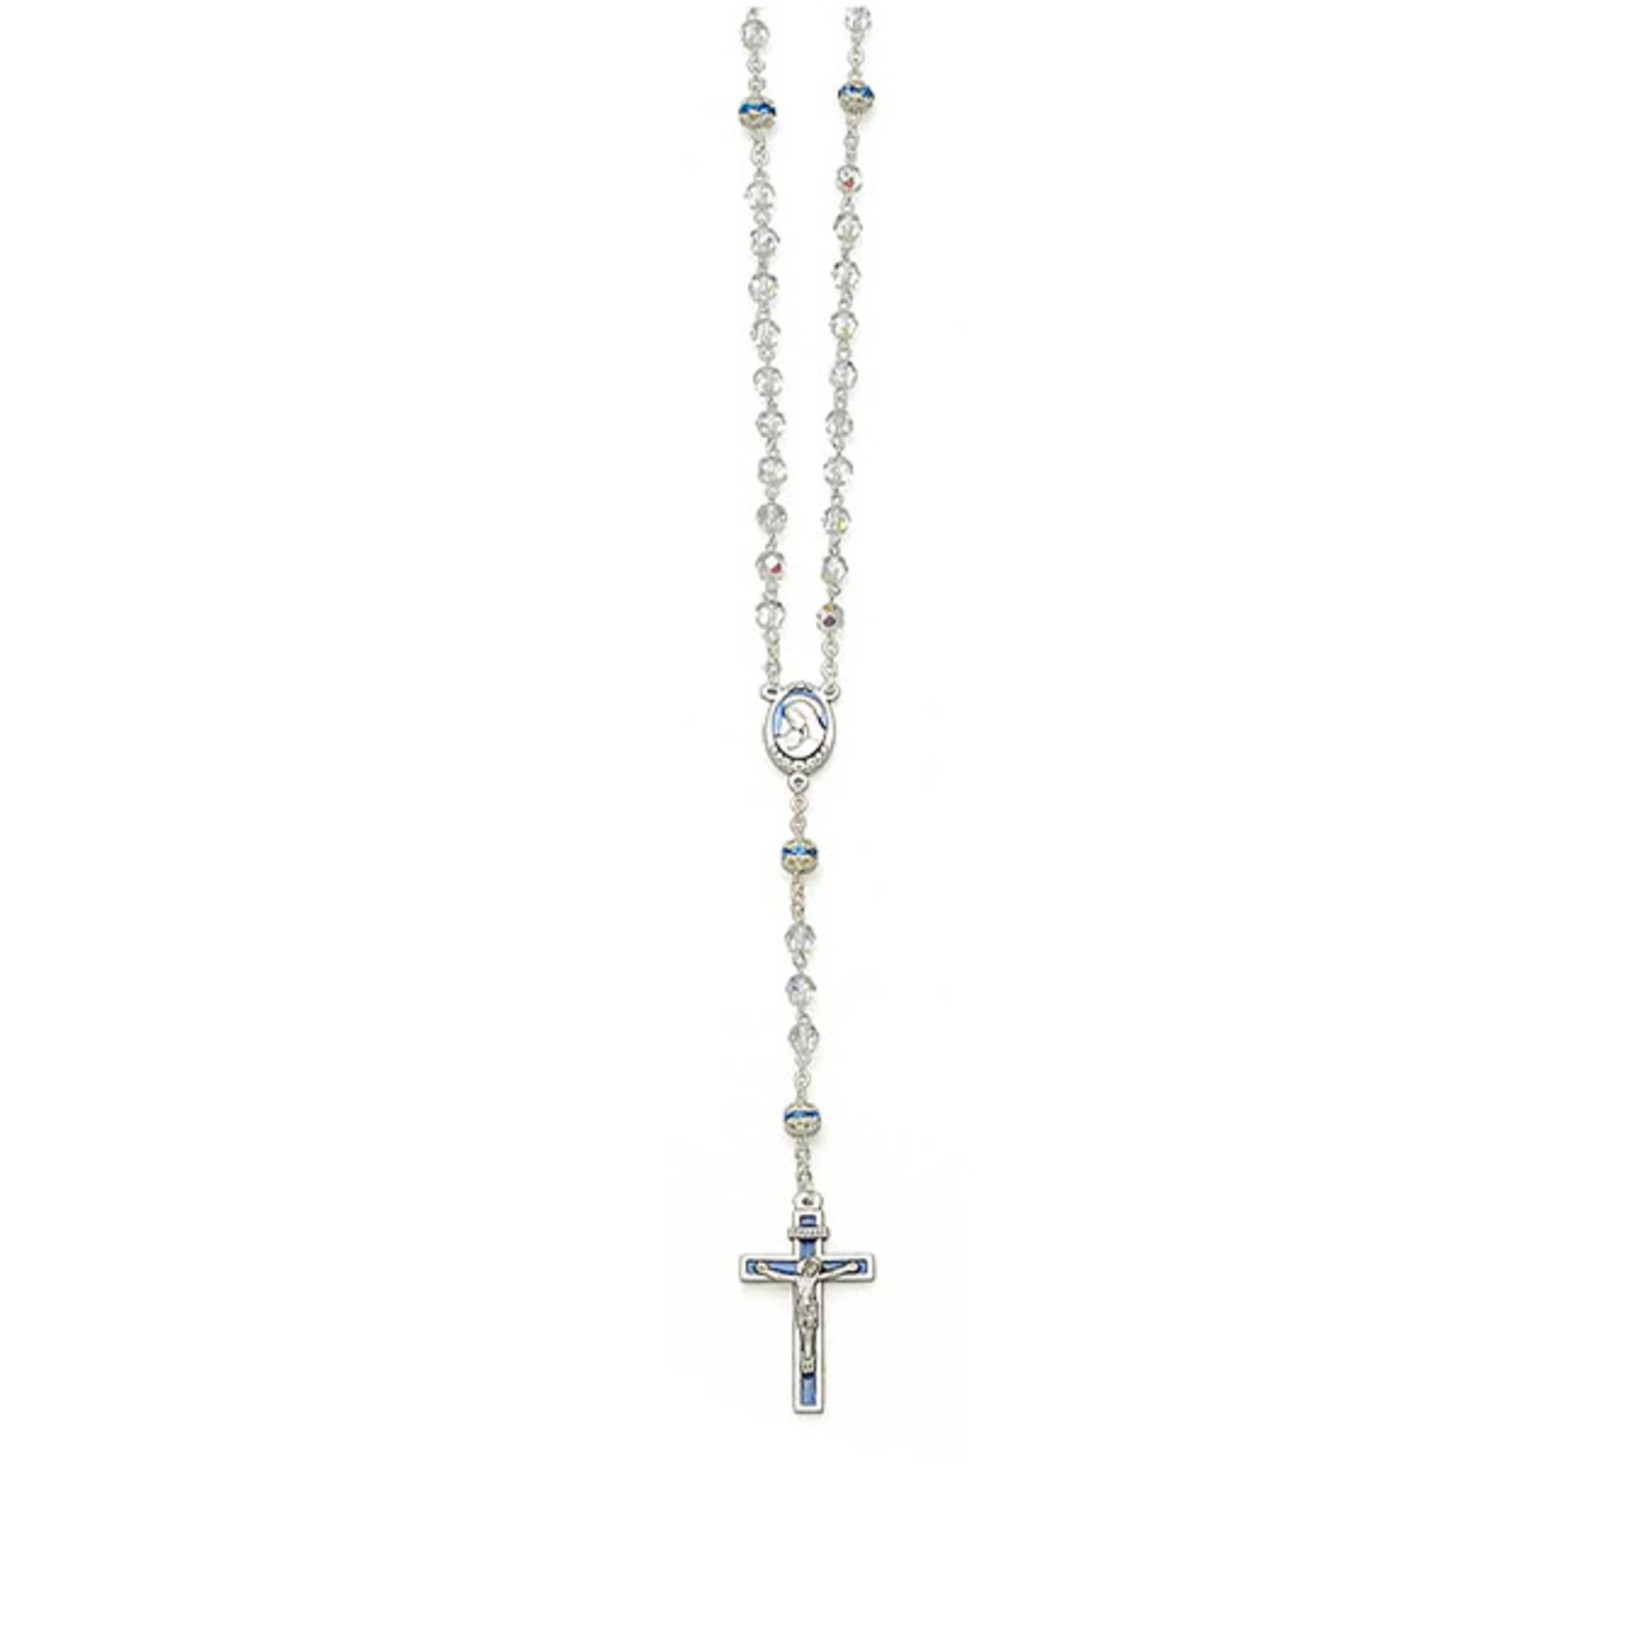 Czech Crystal Multi-Faceted Rosaries